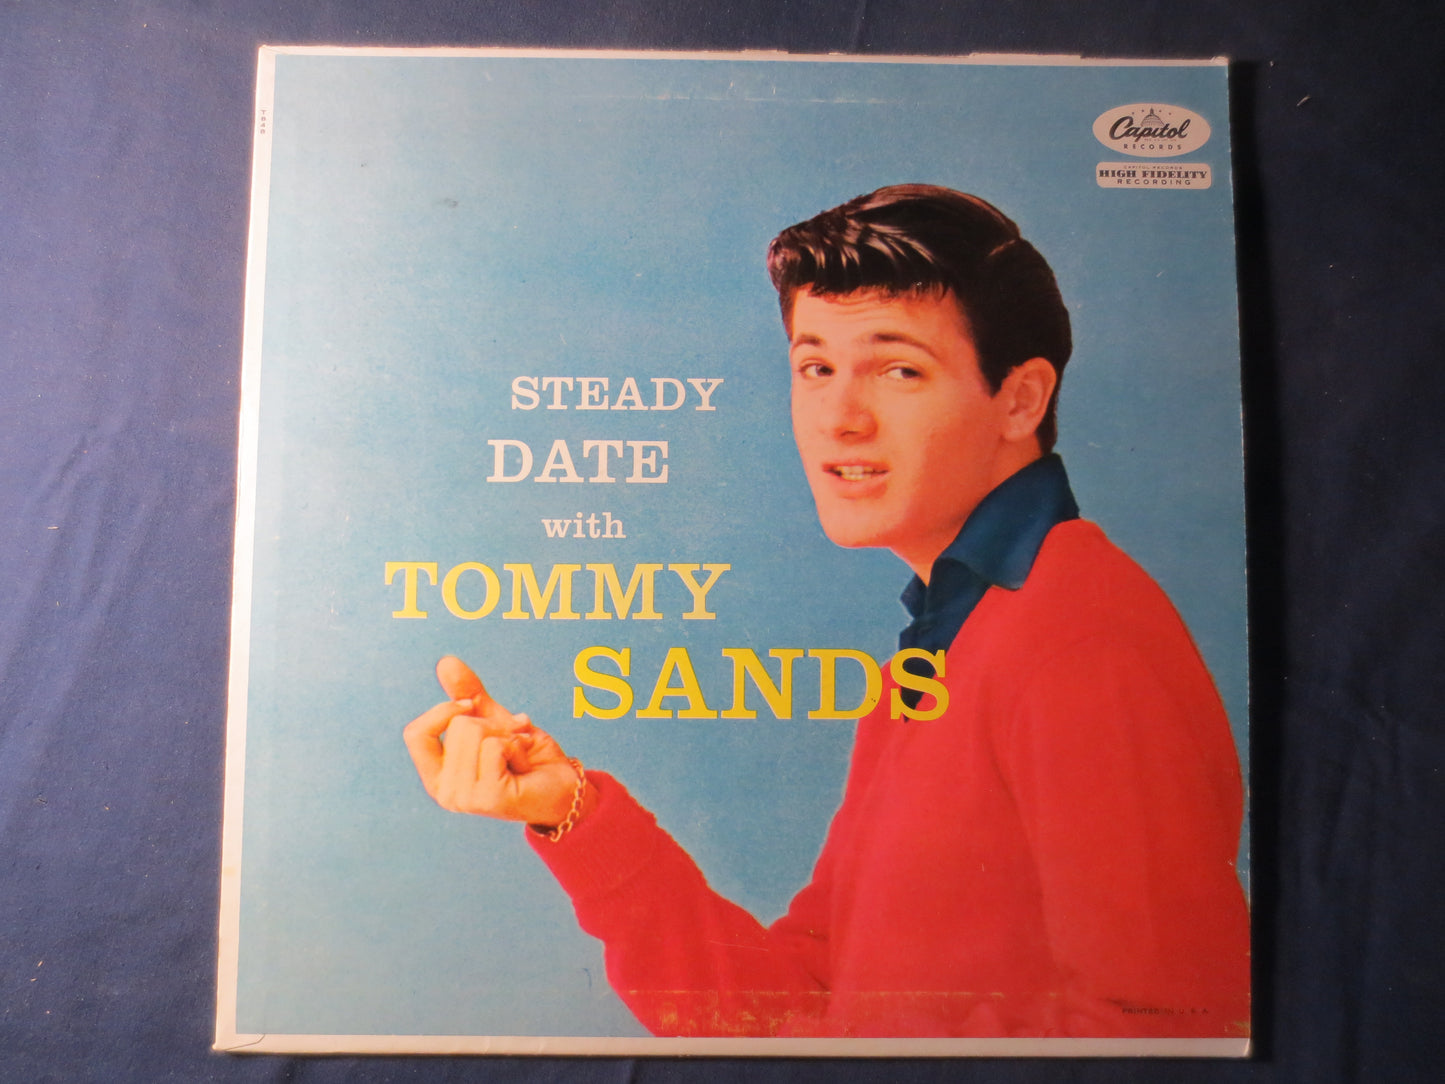 TOMMY SANDS, 1st Records, Steady Date, Tommy Sands Record, Tommy Sands Album, Tommy Sands Lp, Vinyl Records, 1957 Records